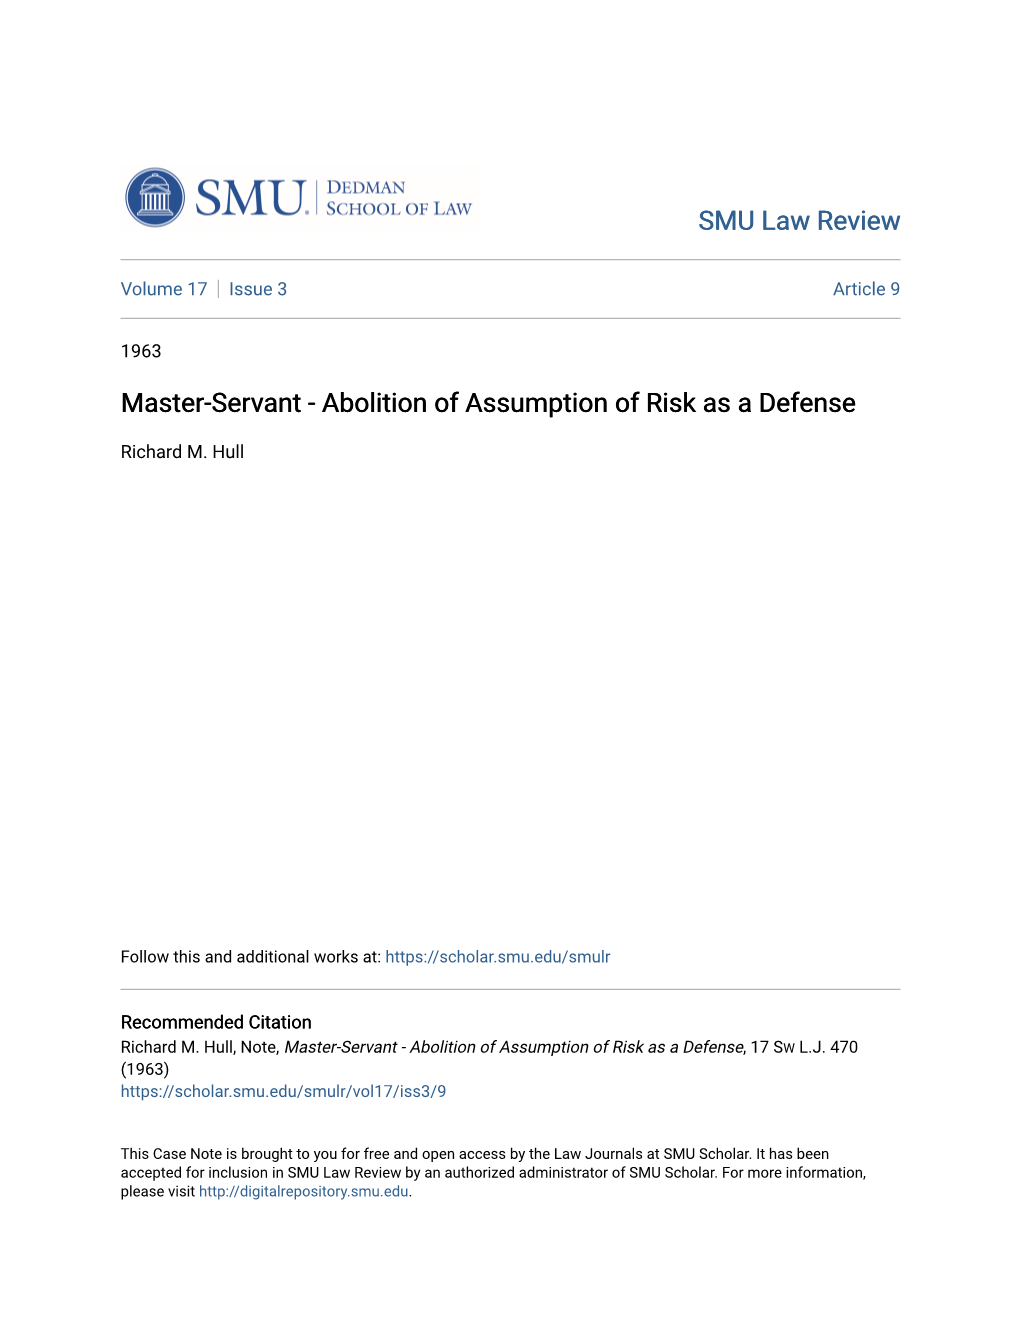 Abolition of Assumption of Risk As a Defense